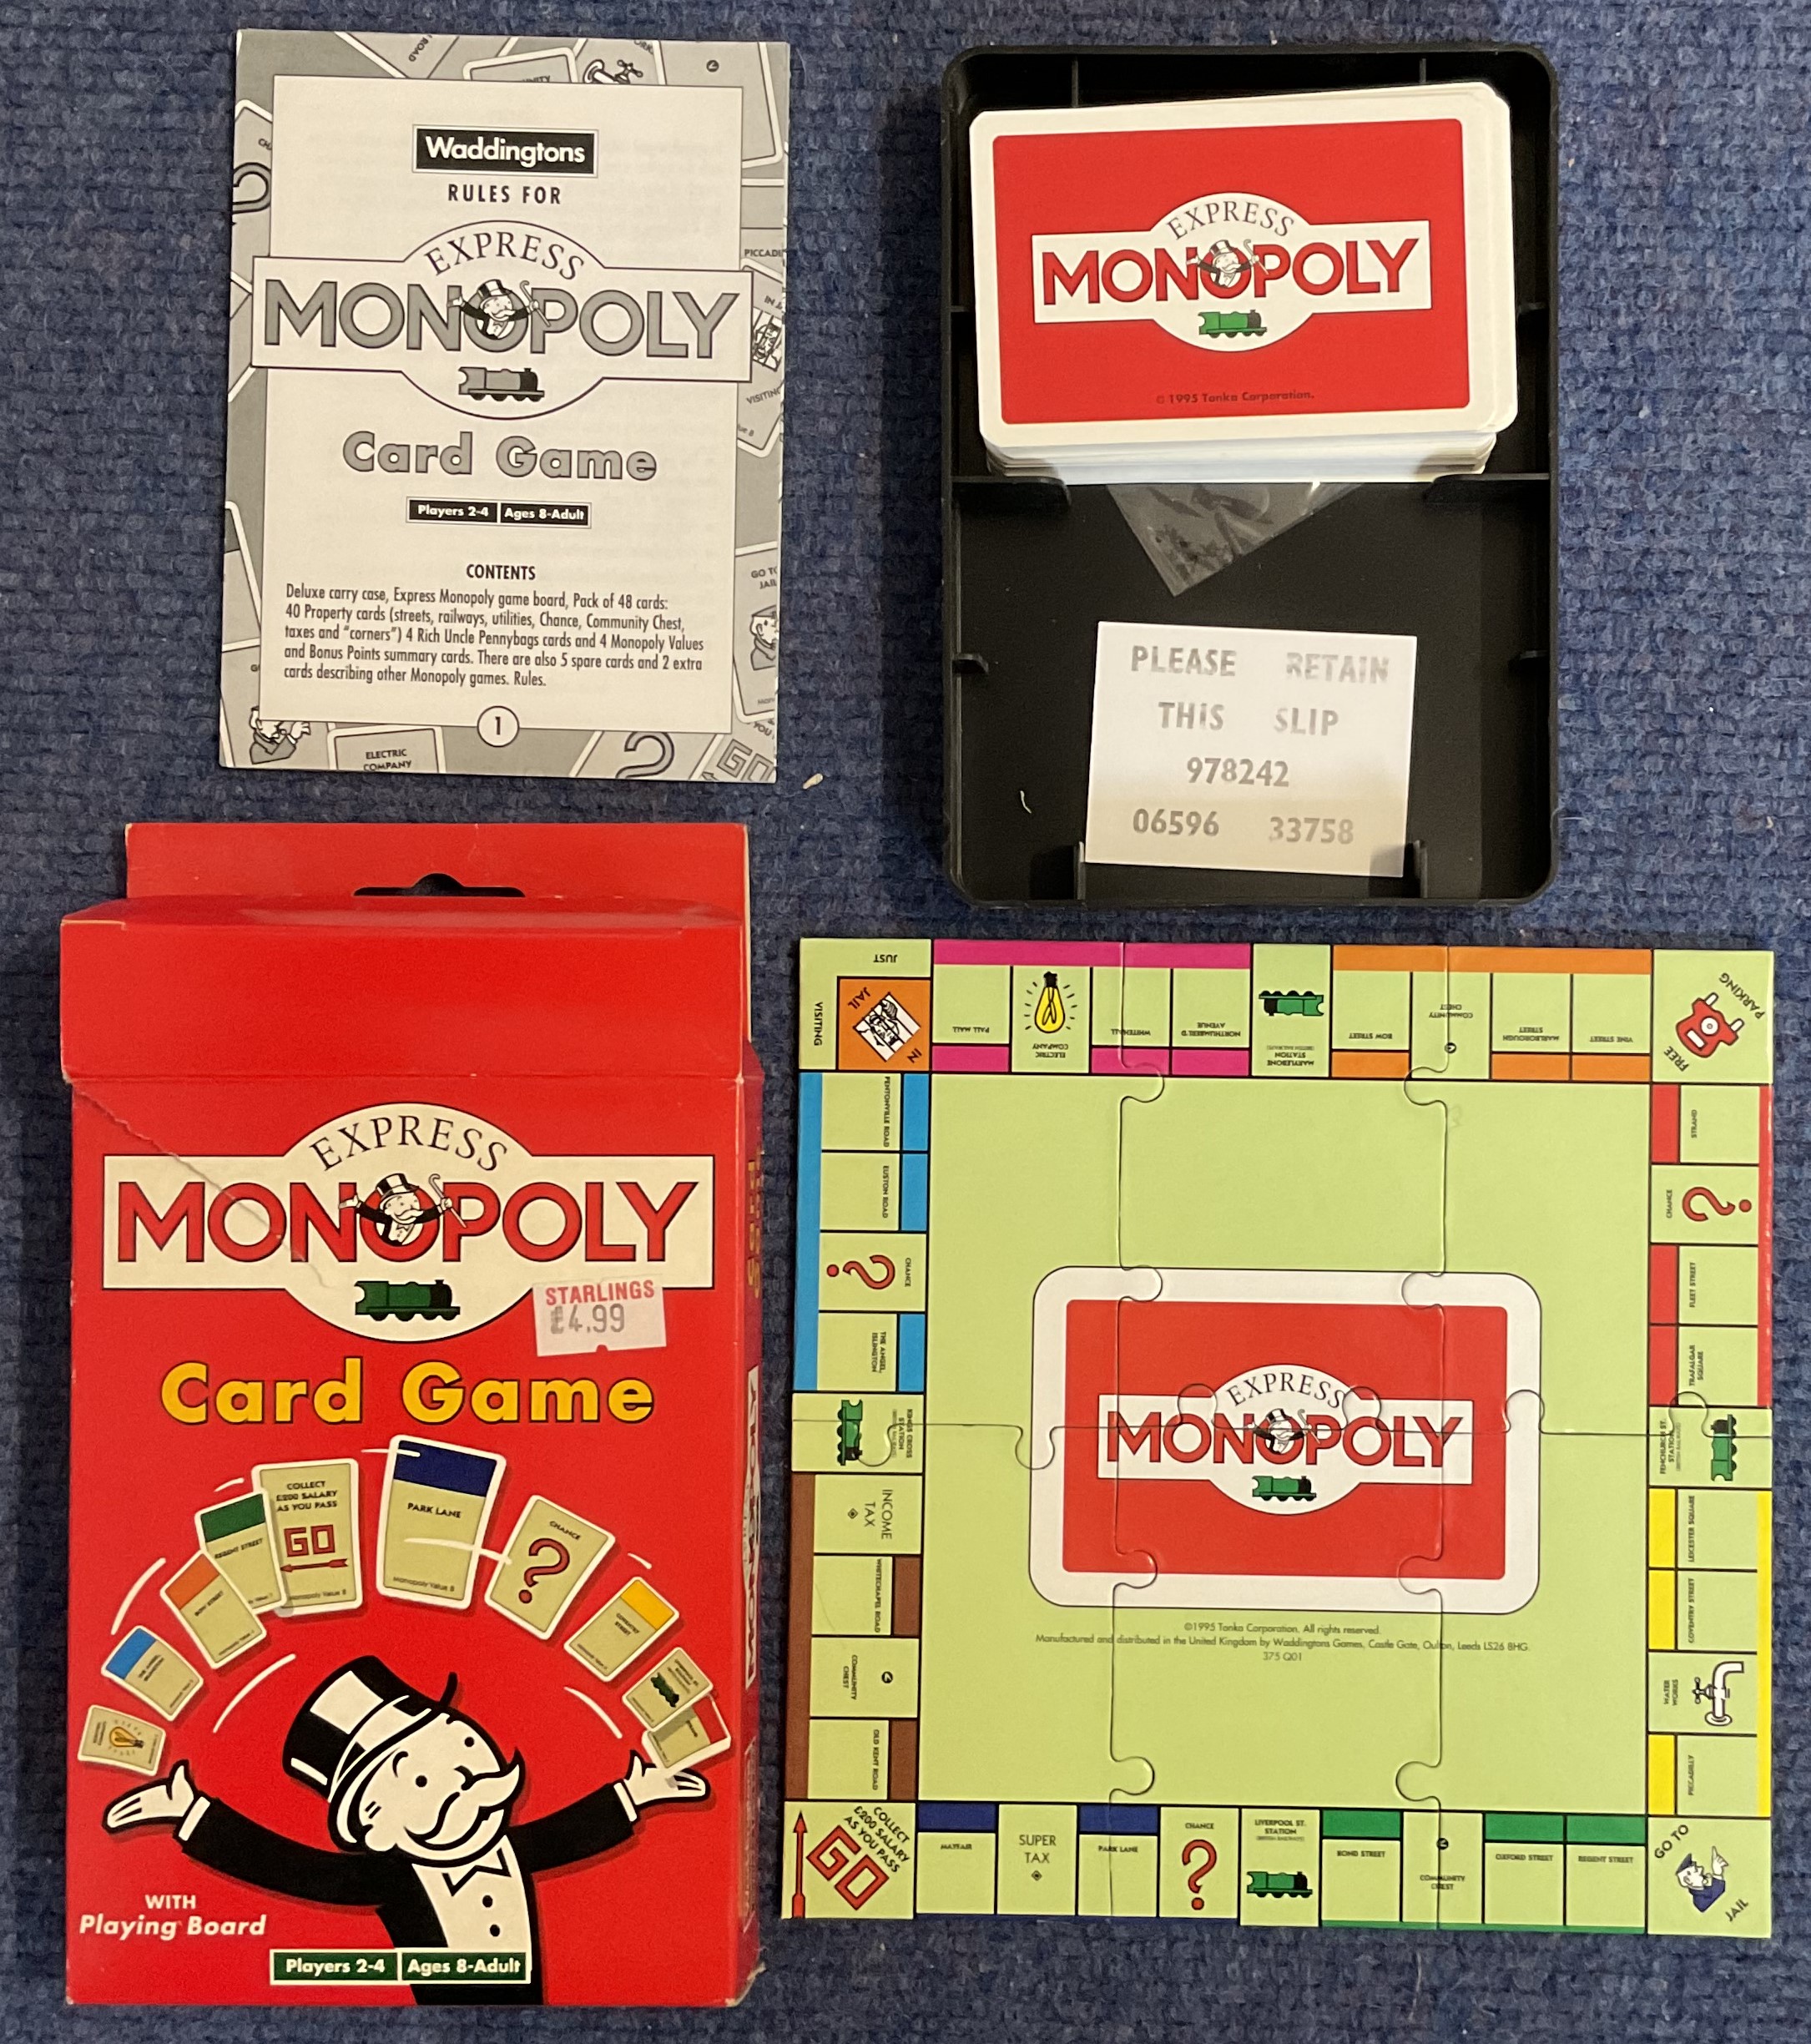 Express Monopoly Card Game with playing board (Tonka Corp) 1995 complete and in box with minor